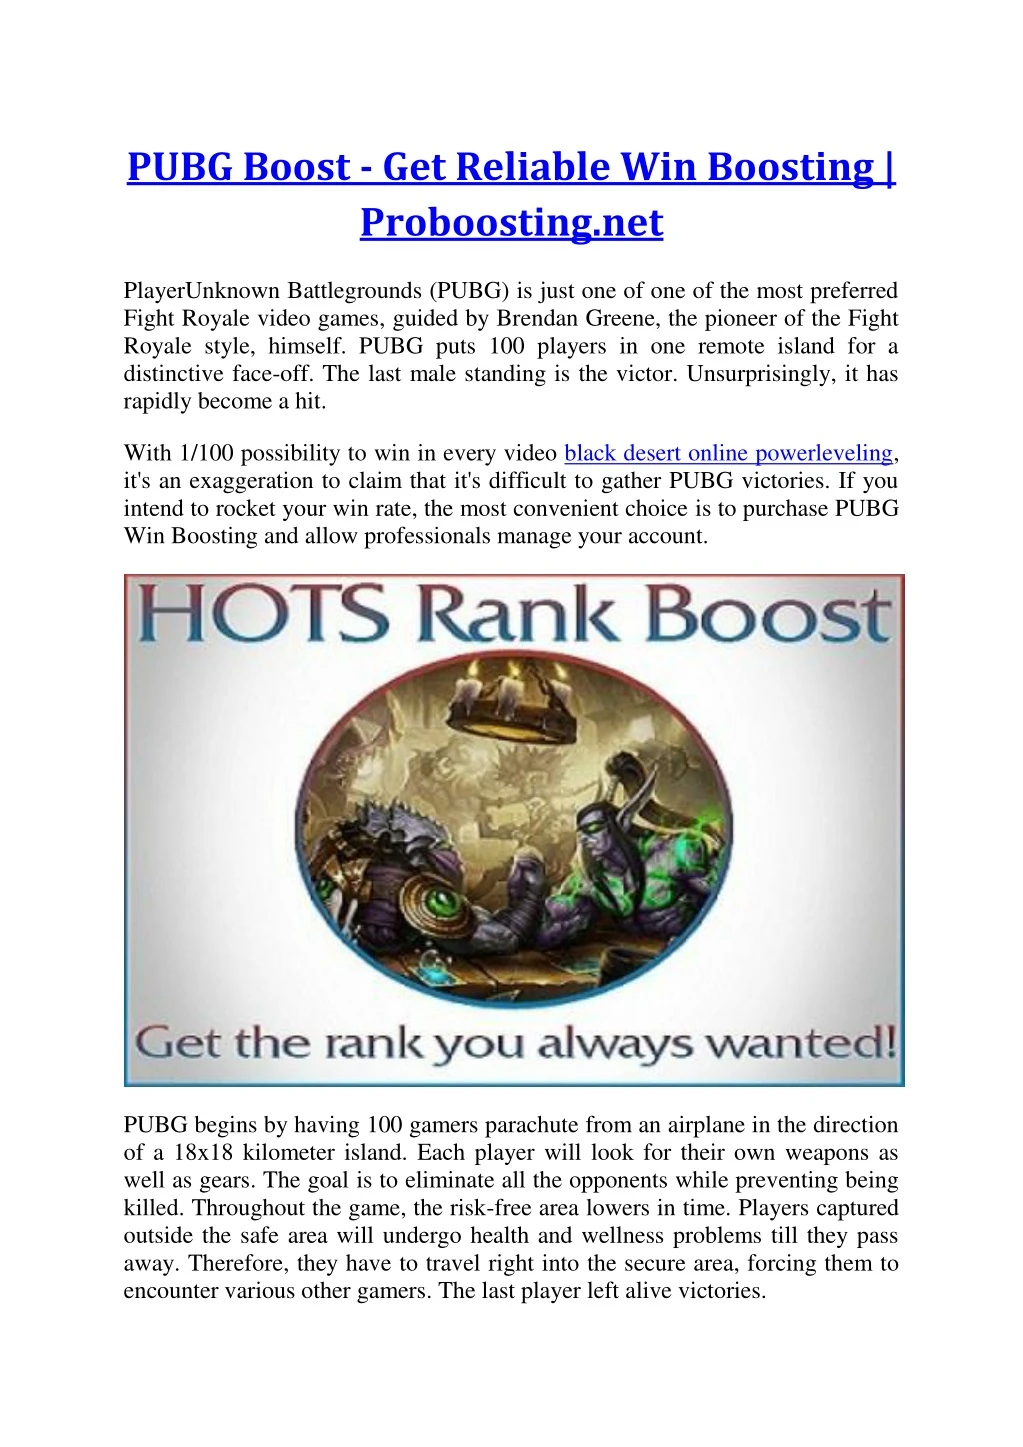 pubg boost get reliable win boosting proboosting